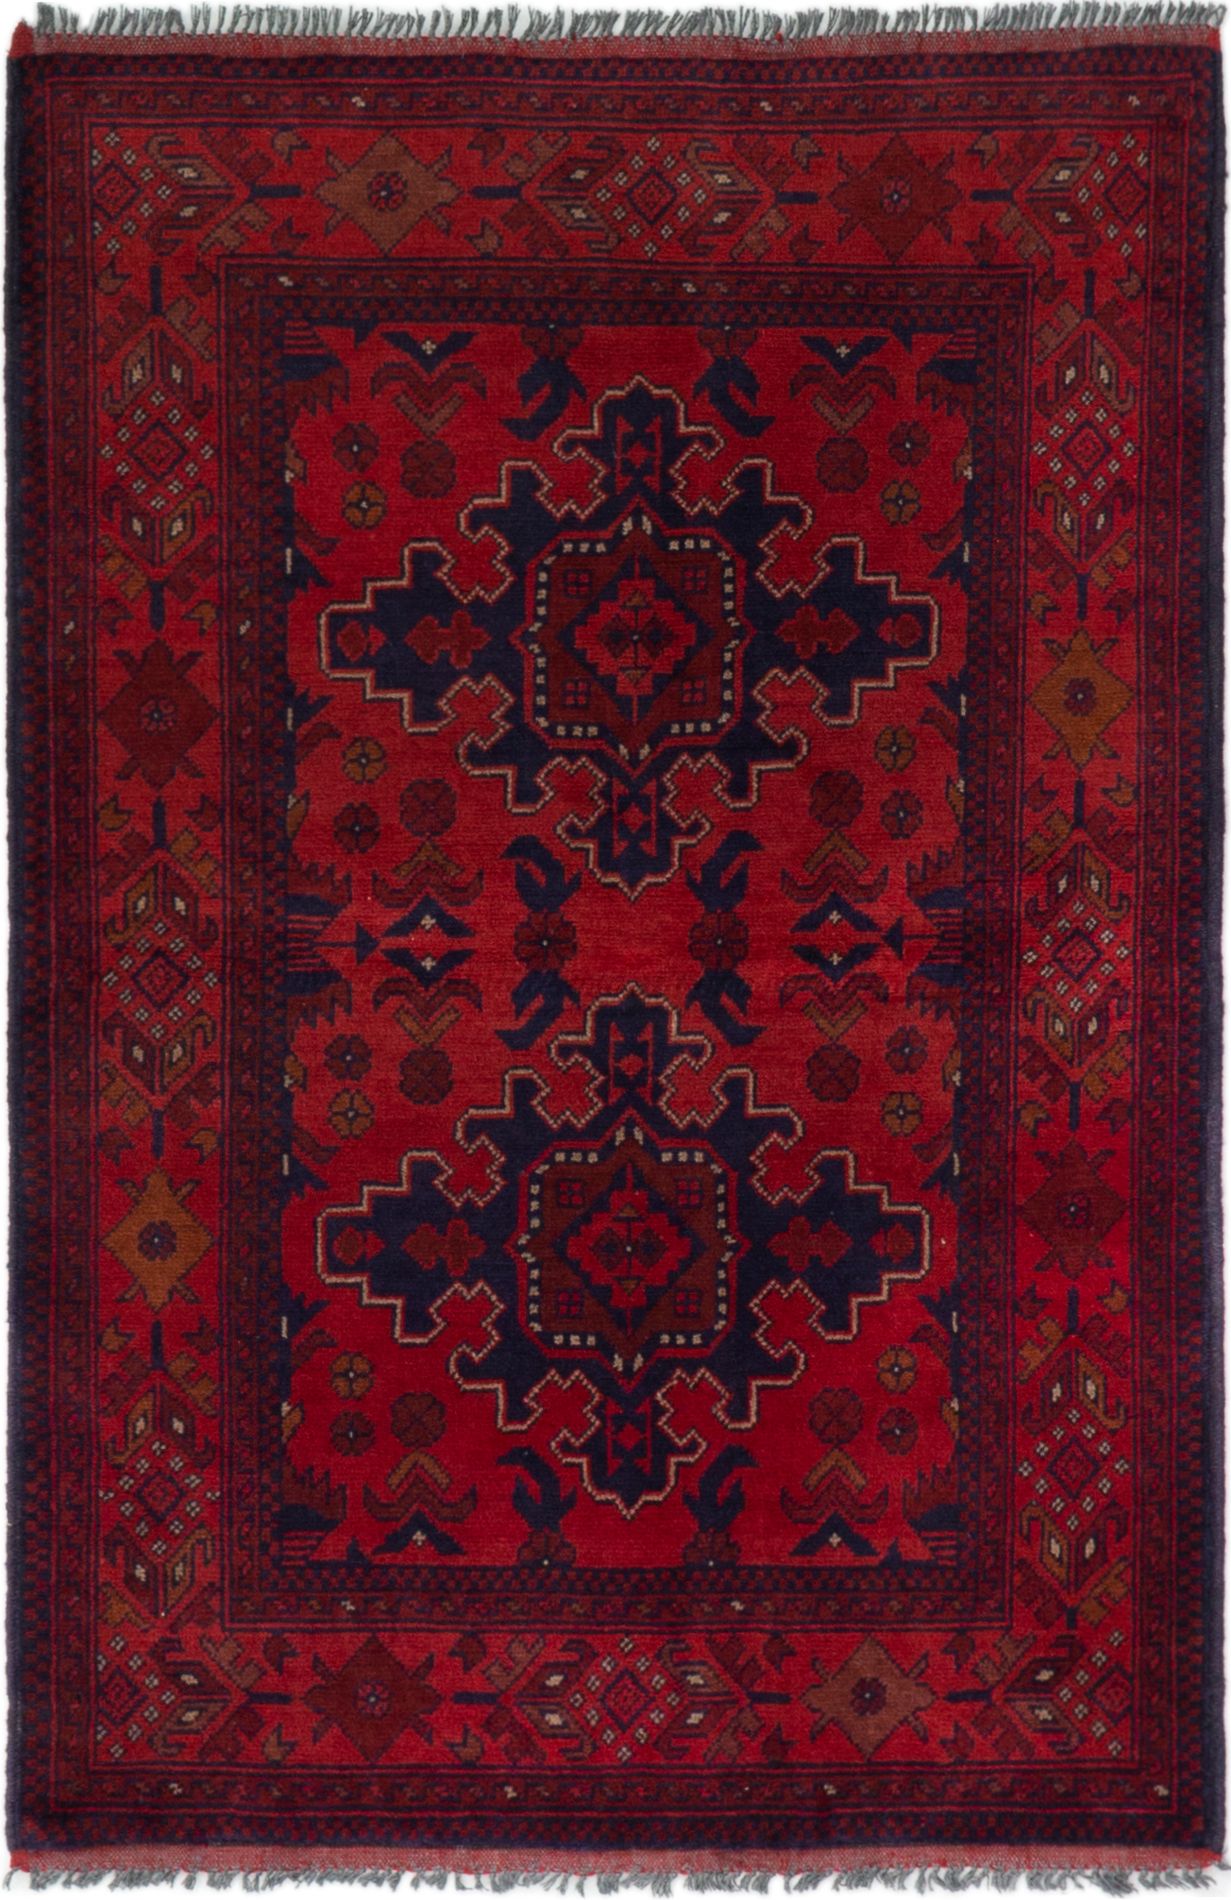 Hand-knotted Finest Khal Mohammadi Red Wool Rug 3'1" x 4'9"  Size: 3'1" x 4'9"  